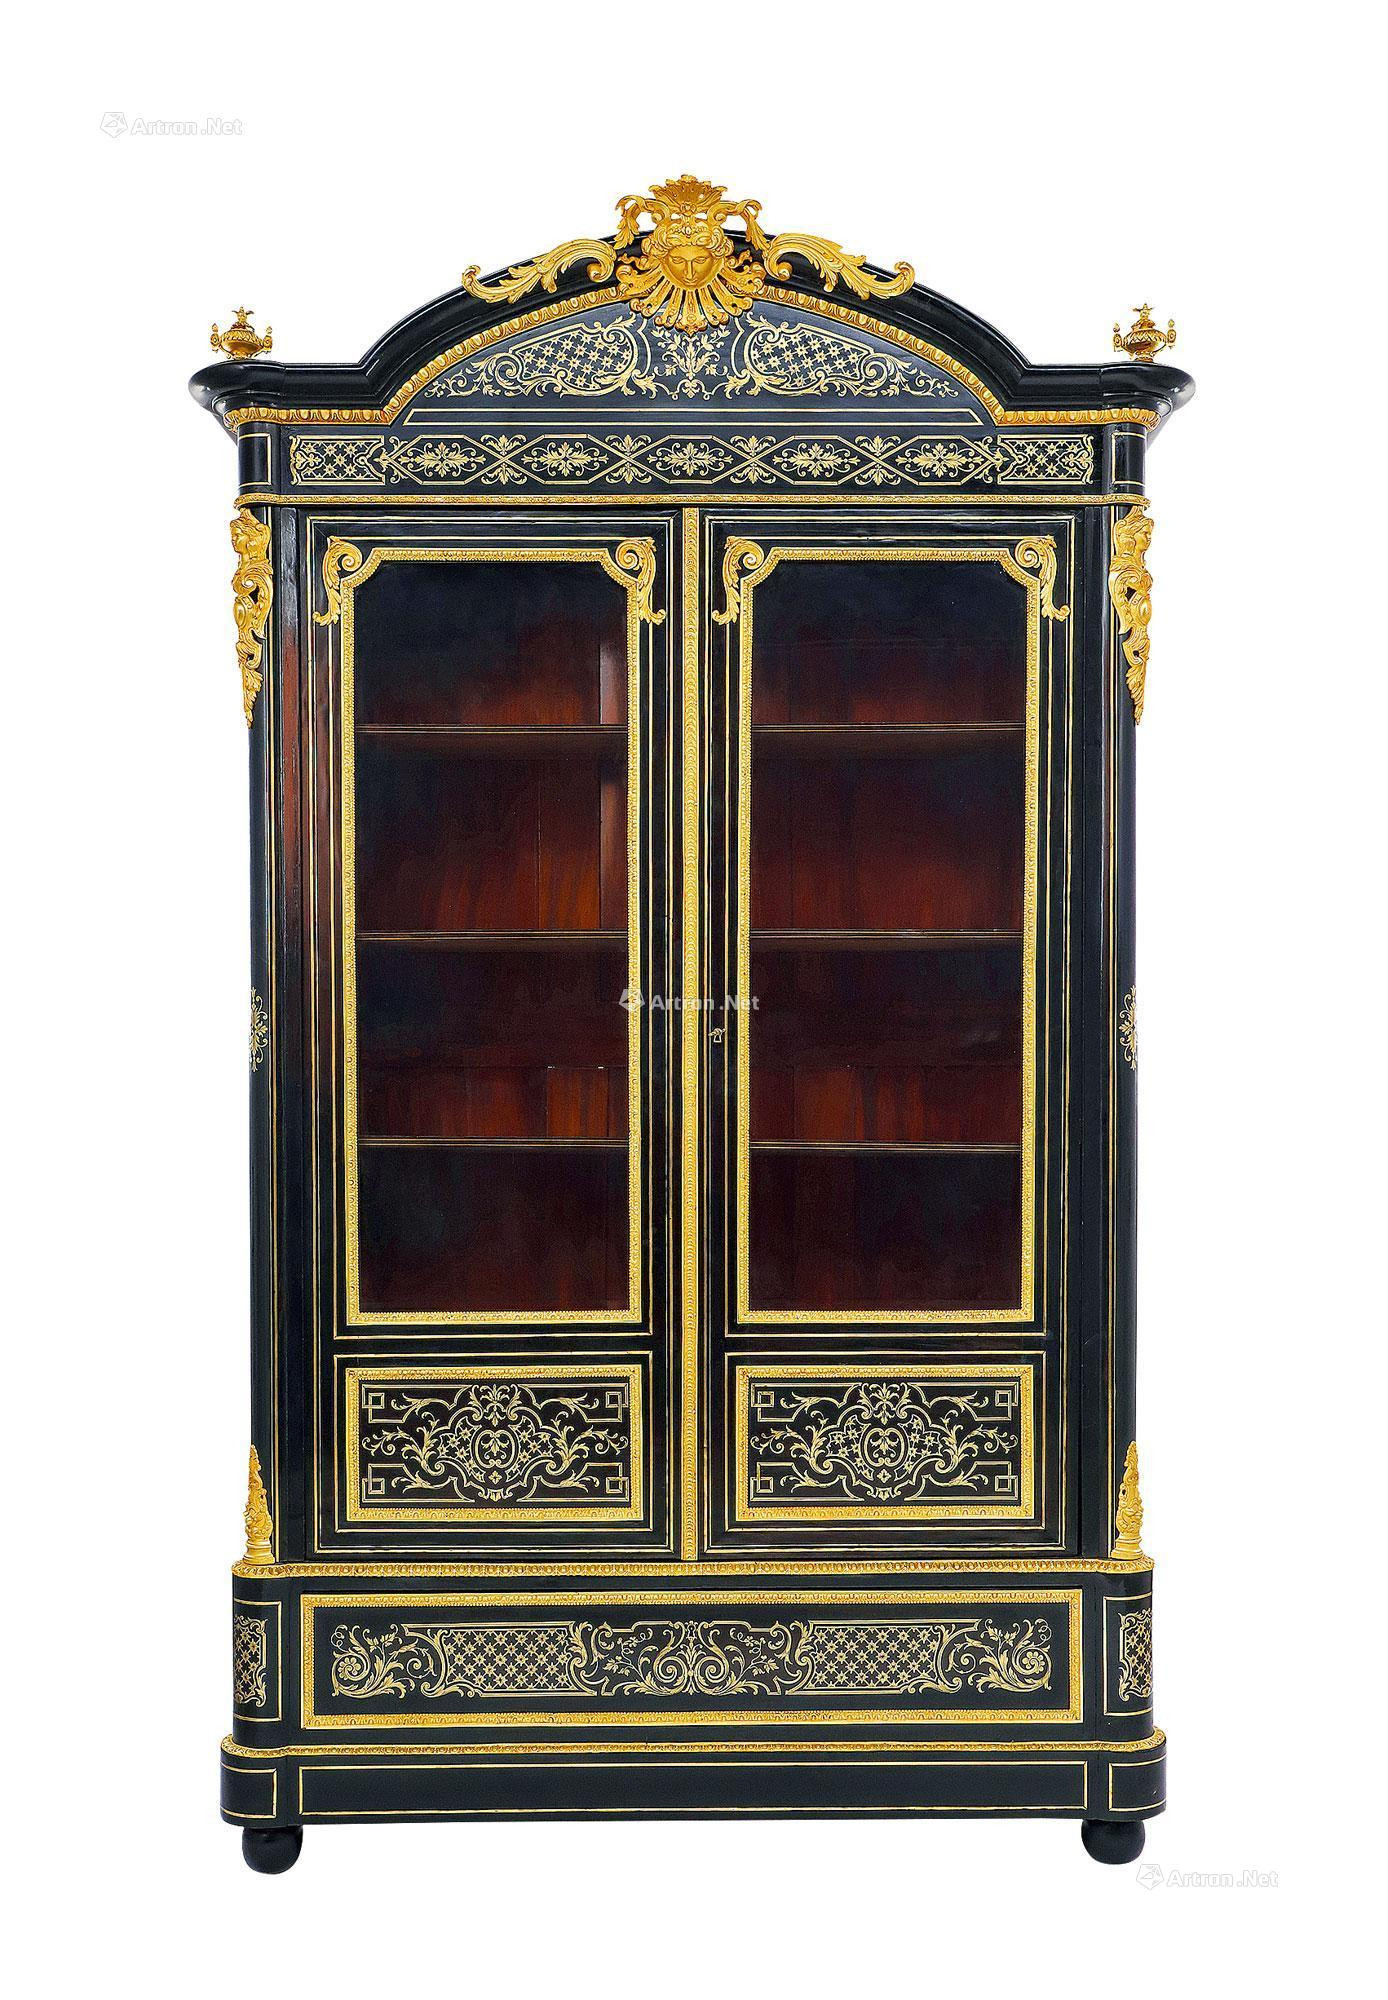 A FRENCH BOULLE STYLE GILT BRONZE MARQUETRY EBONY VITRINE